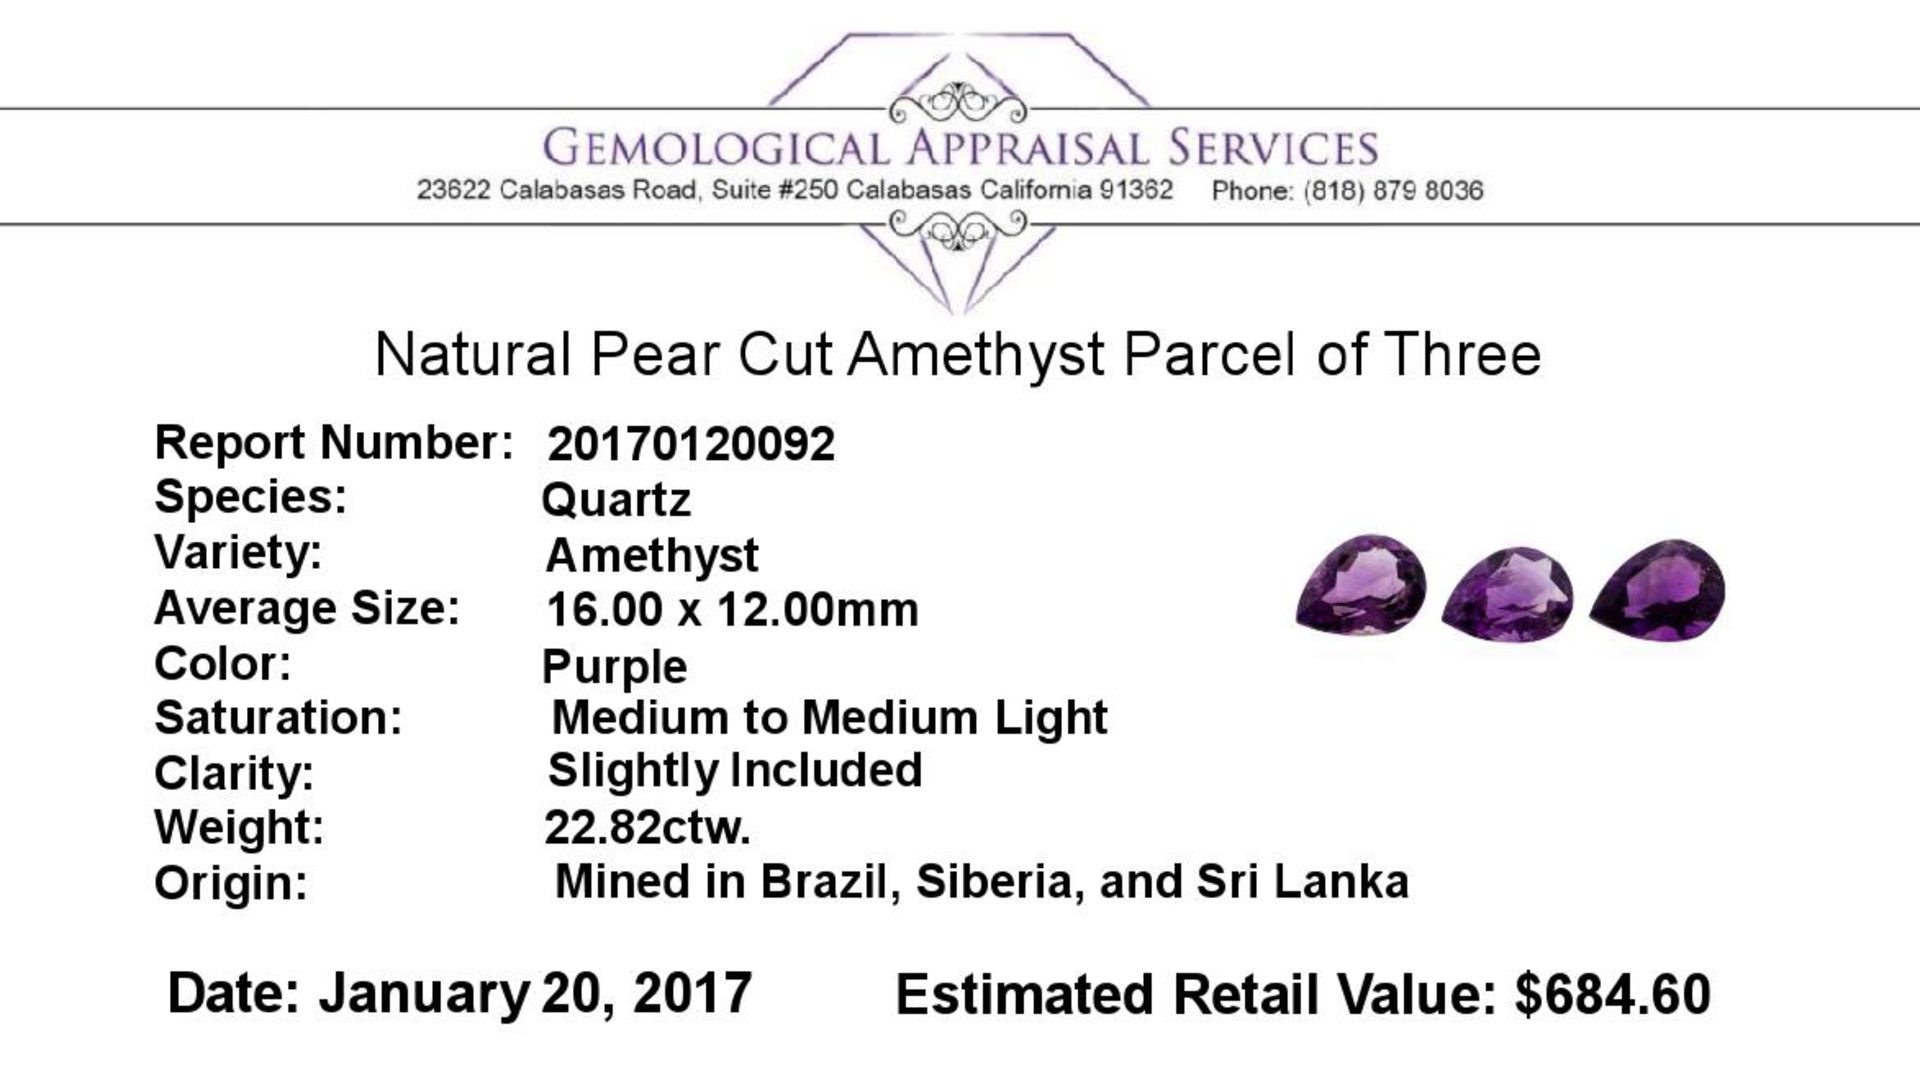 22.82 ctw.Natural Pear Cut Amethyst Parcel of Three - Image 3 of 3